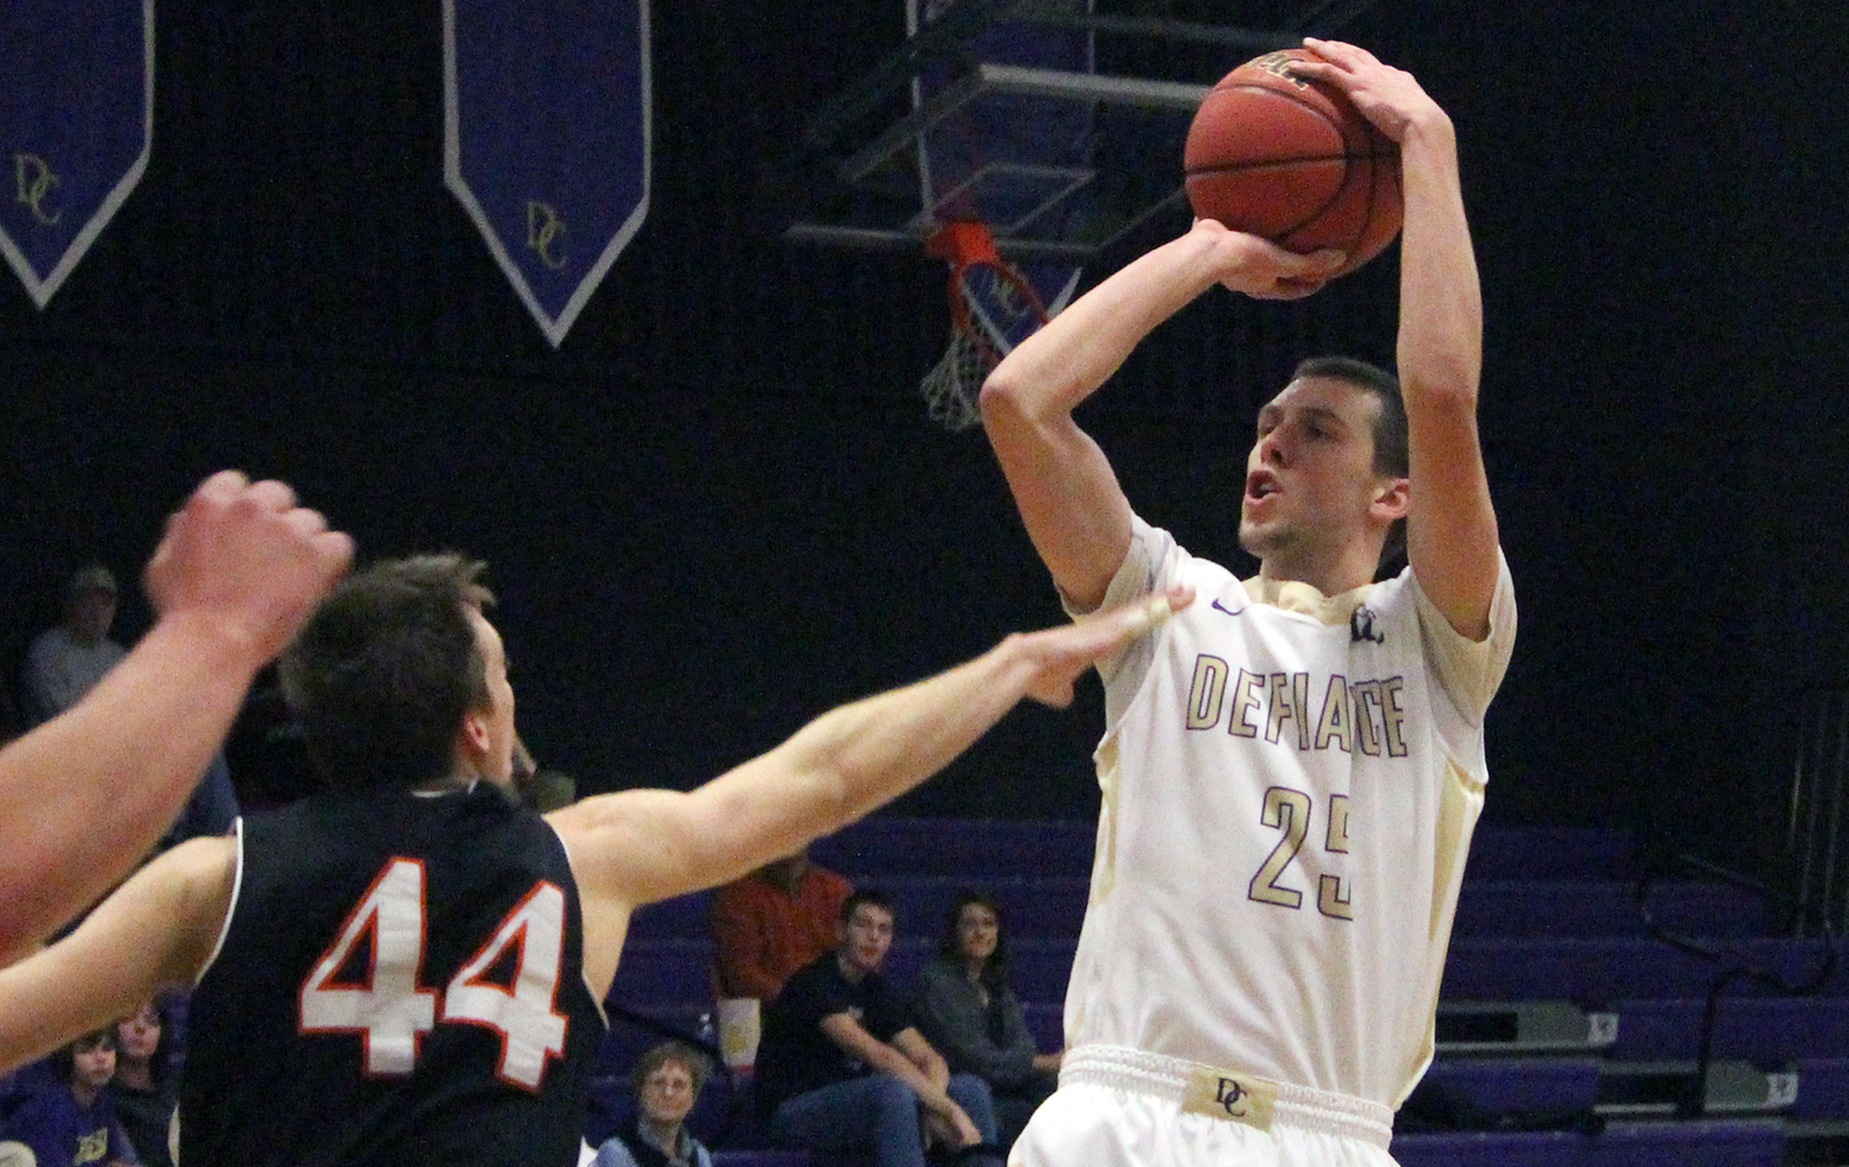 Hicks leads Yellow Jackets to 71-55 victory over Earlham